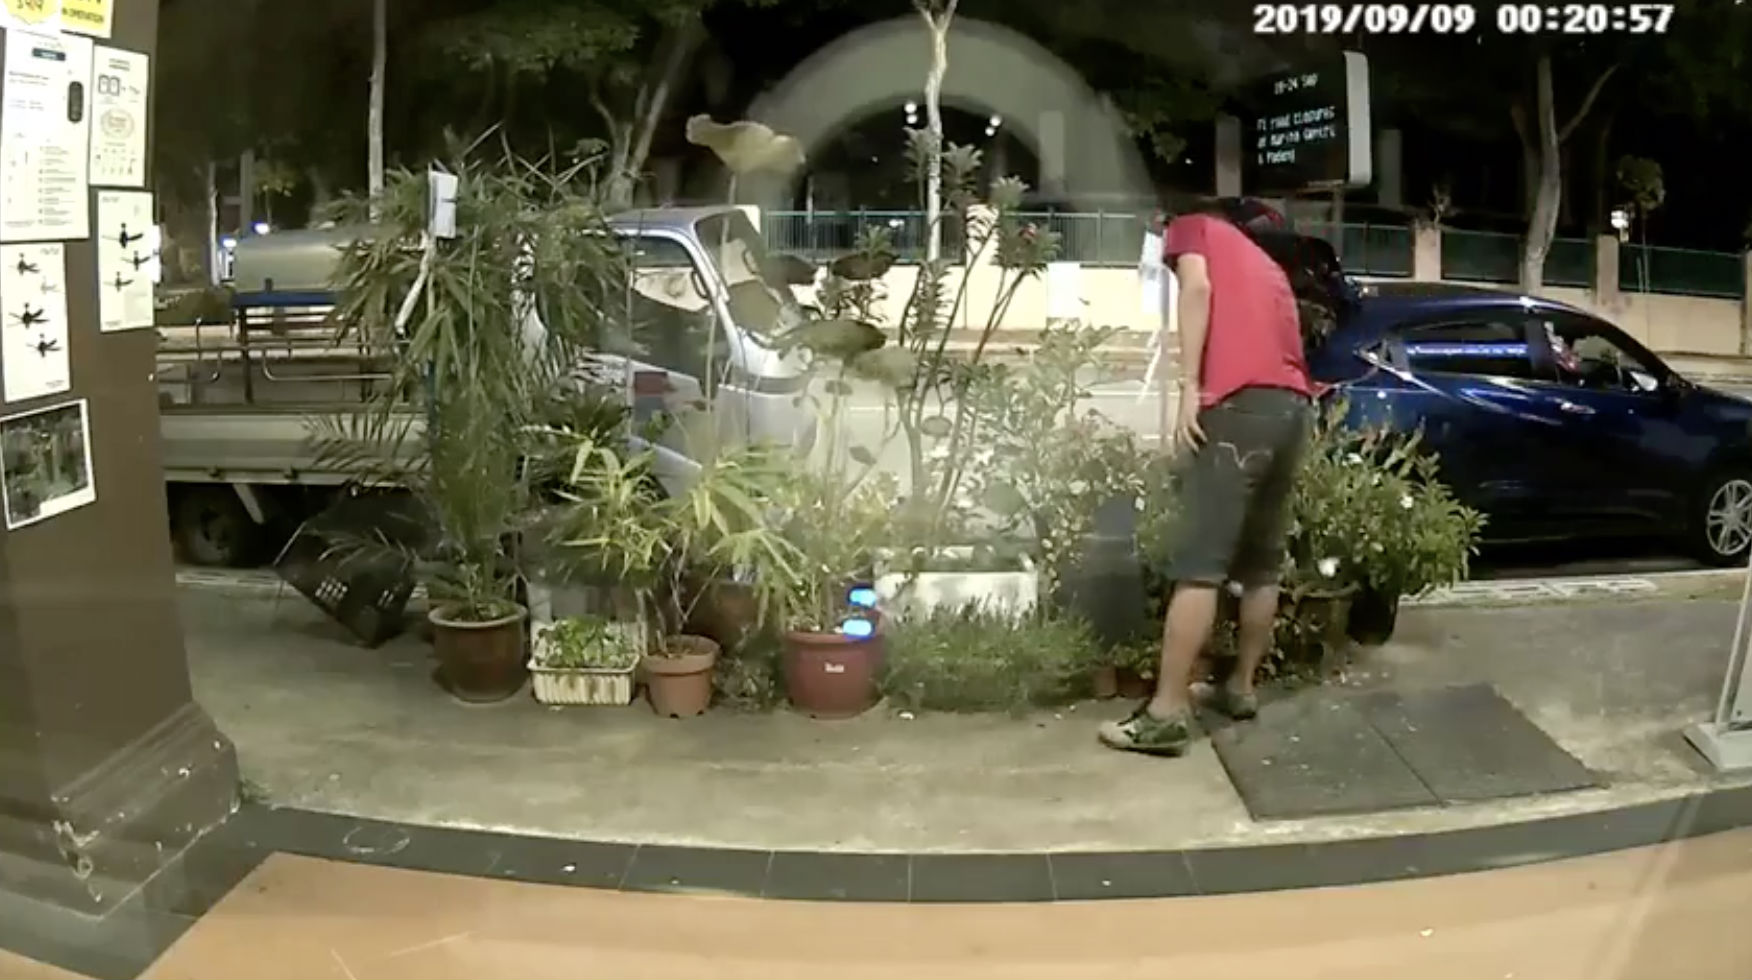 Screenshot of a video showing a man attempting to steal plants in Geylang. Taken from District Singapore’s Facebook page.